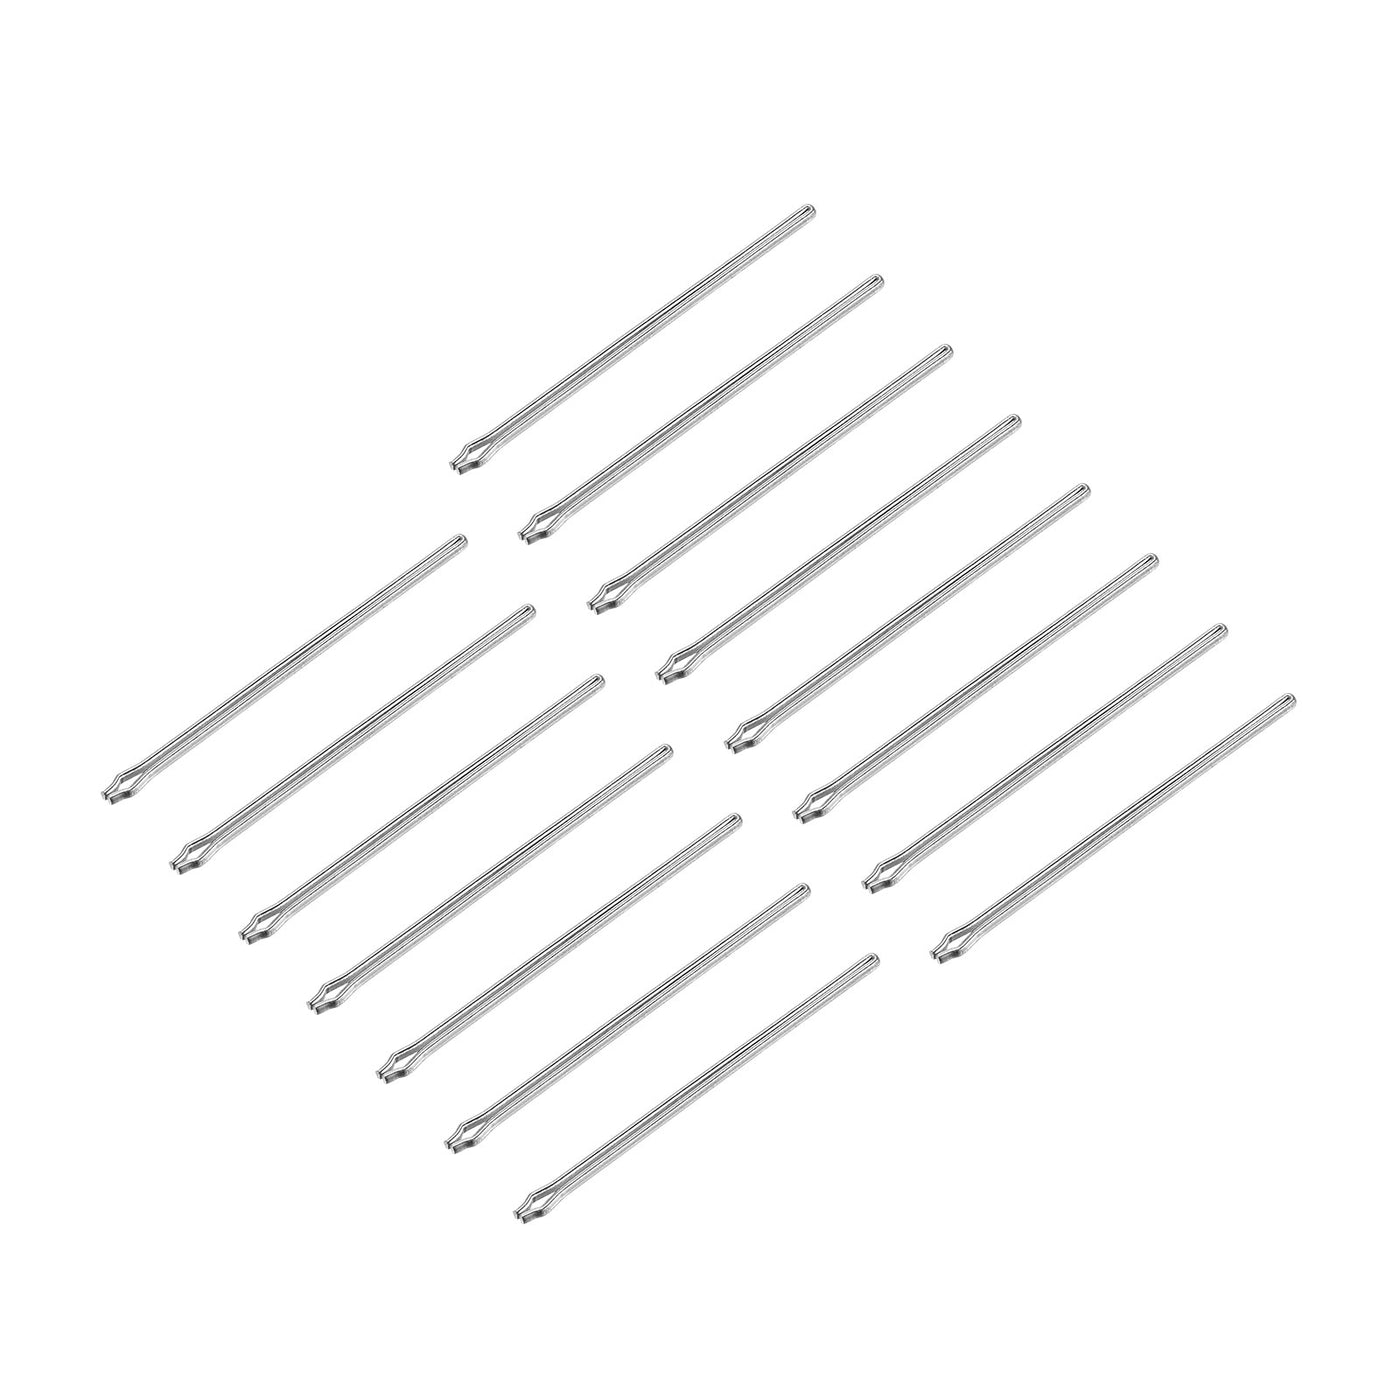 Uxcell Uxcell 15Pcs 15mm Watch Band Link Cotter Pin, Stainless Steel 0.9mm Dia. Silver Tone